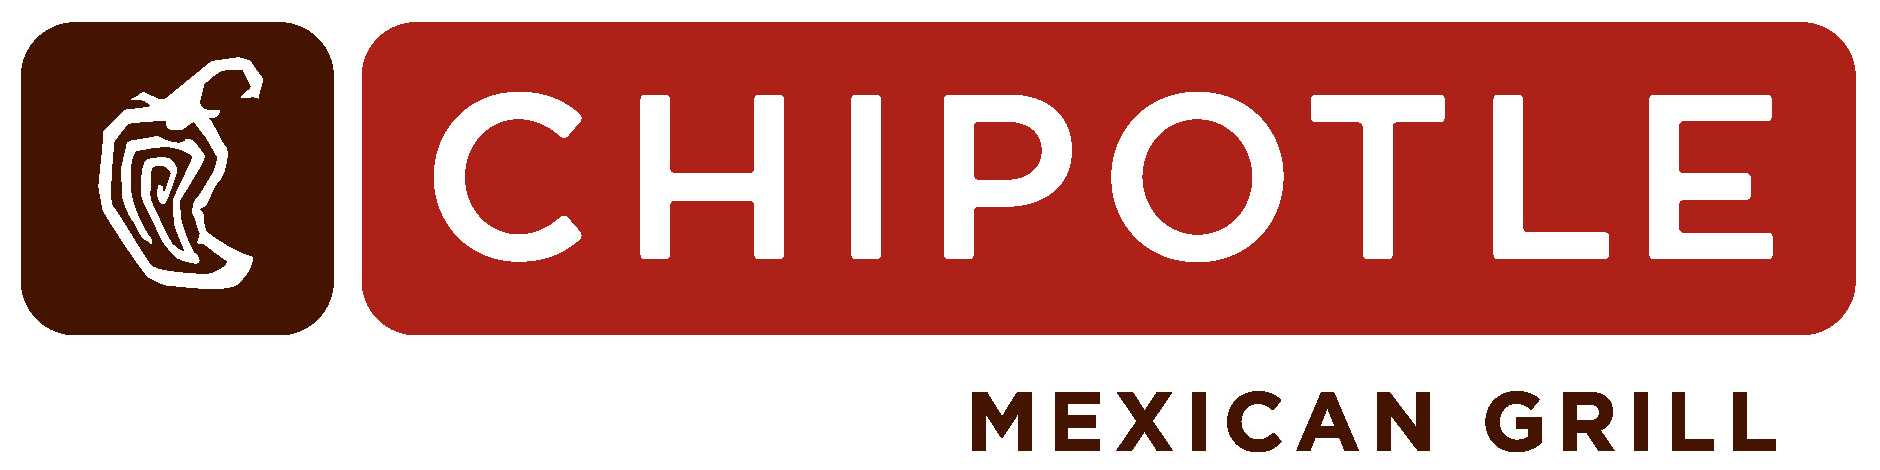 Chipotle Locations Near Me | United States Maps